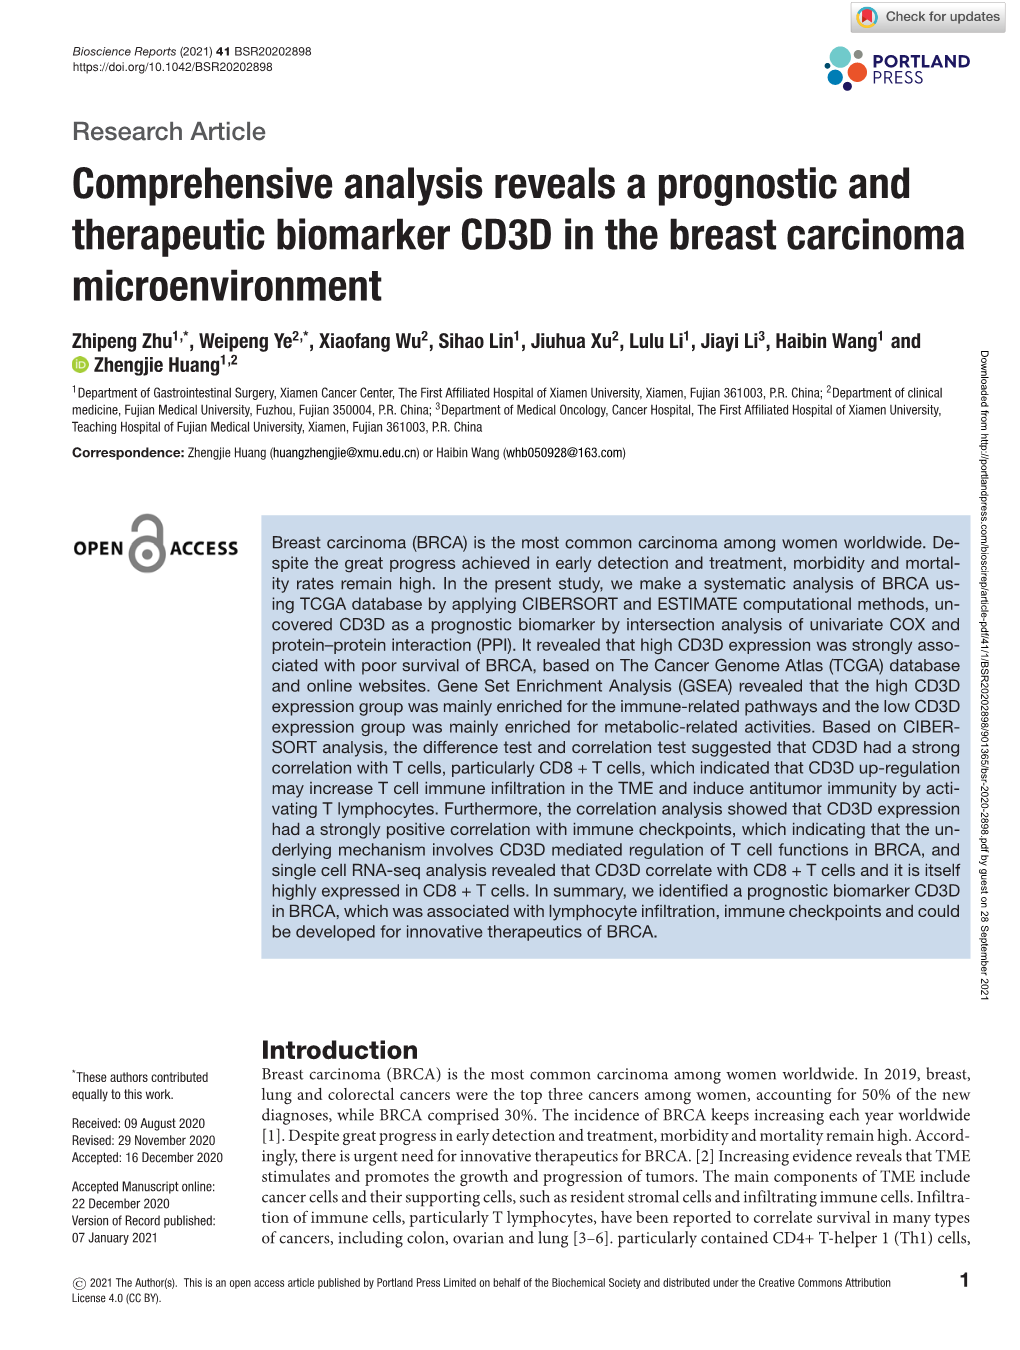 Comprehensive Analysis Reveals a Prognostic and Therapeutic Biomarker CD3D in the Breast Carcinoma Microenvironment